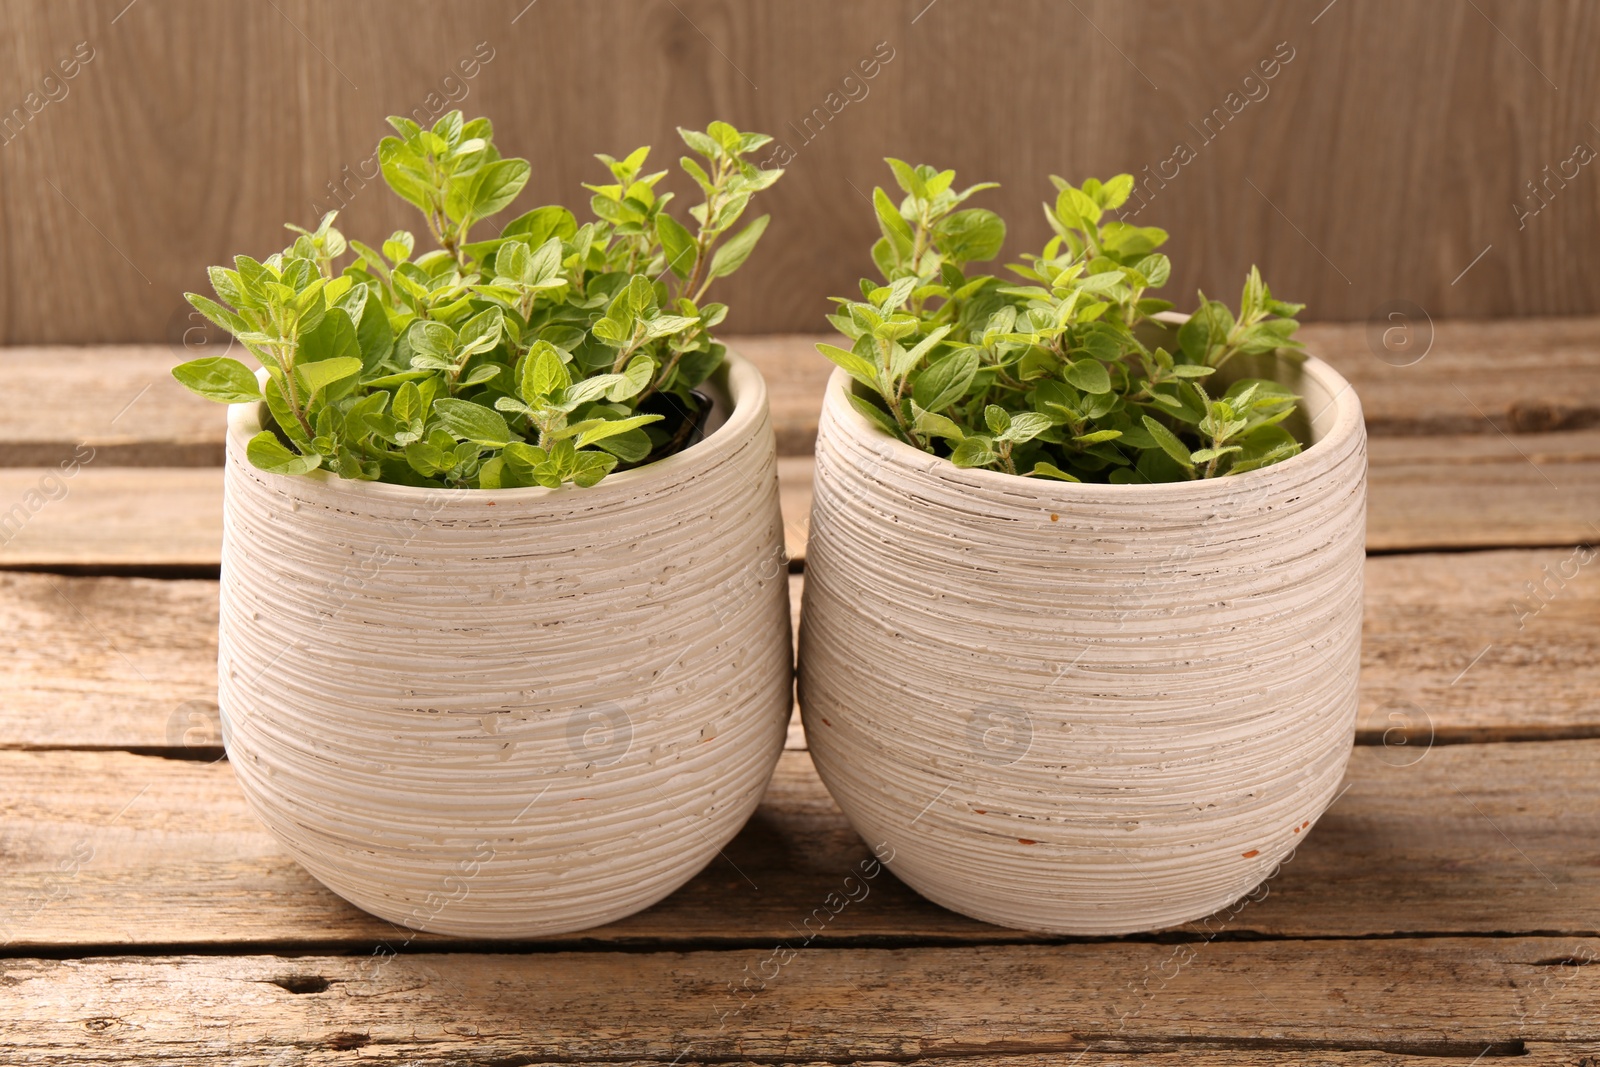 Photo of Aromatic oregano growing in pots on wooden table